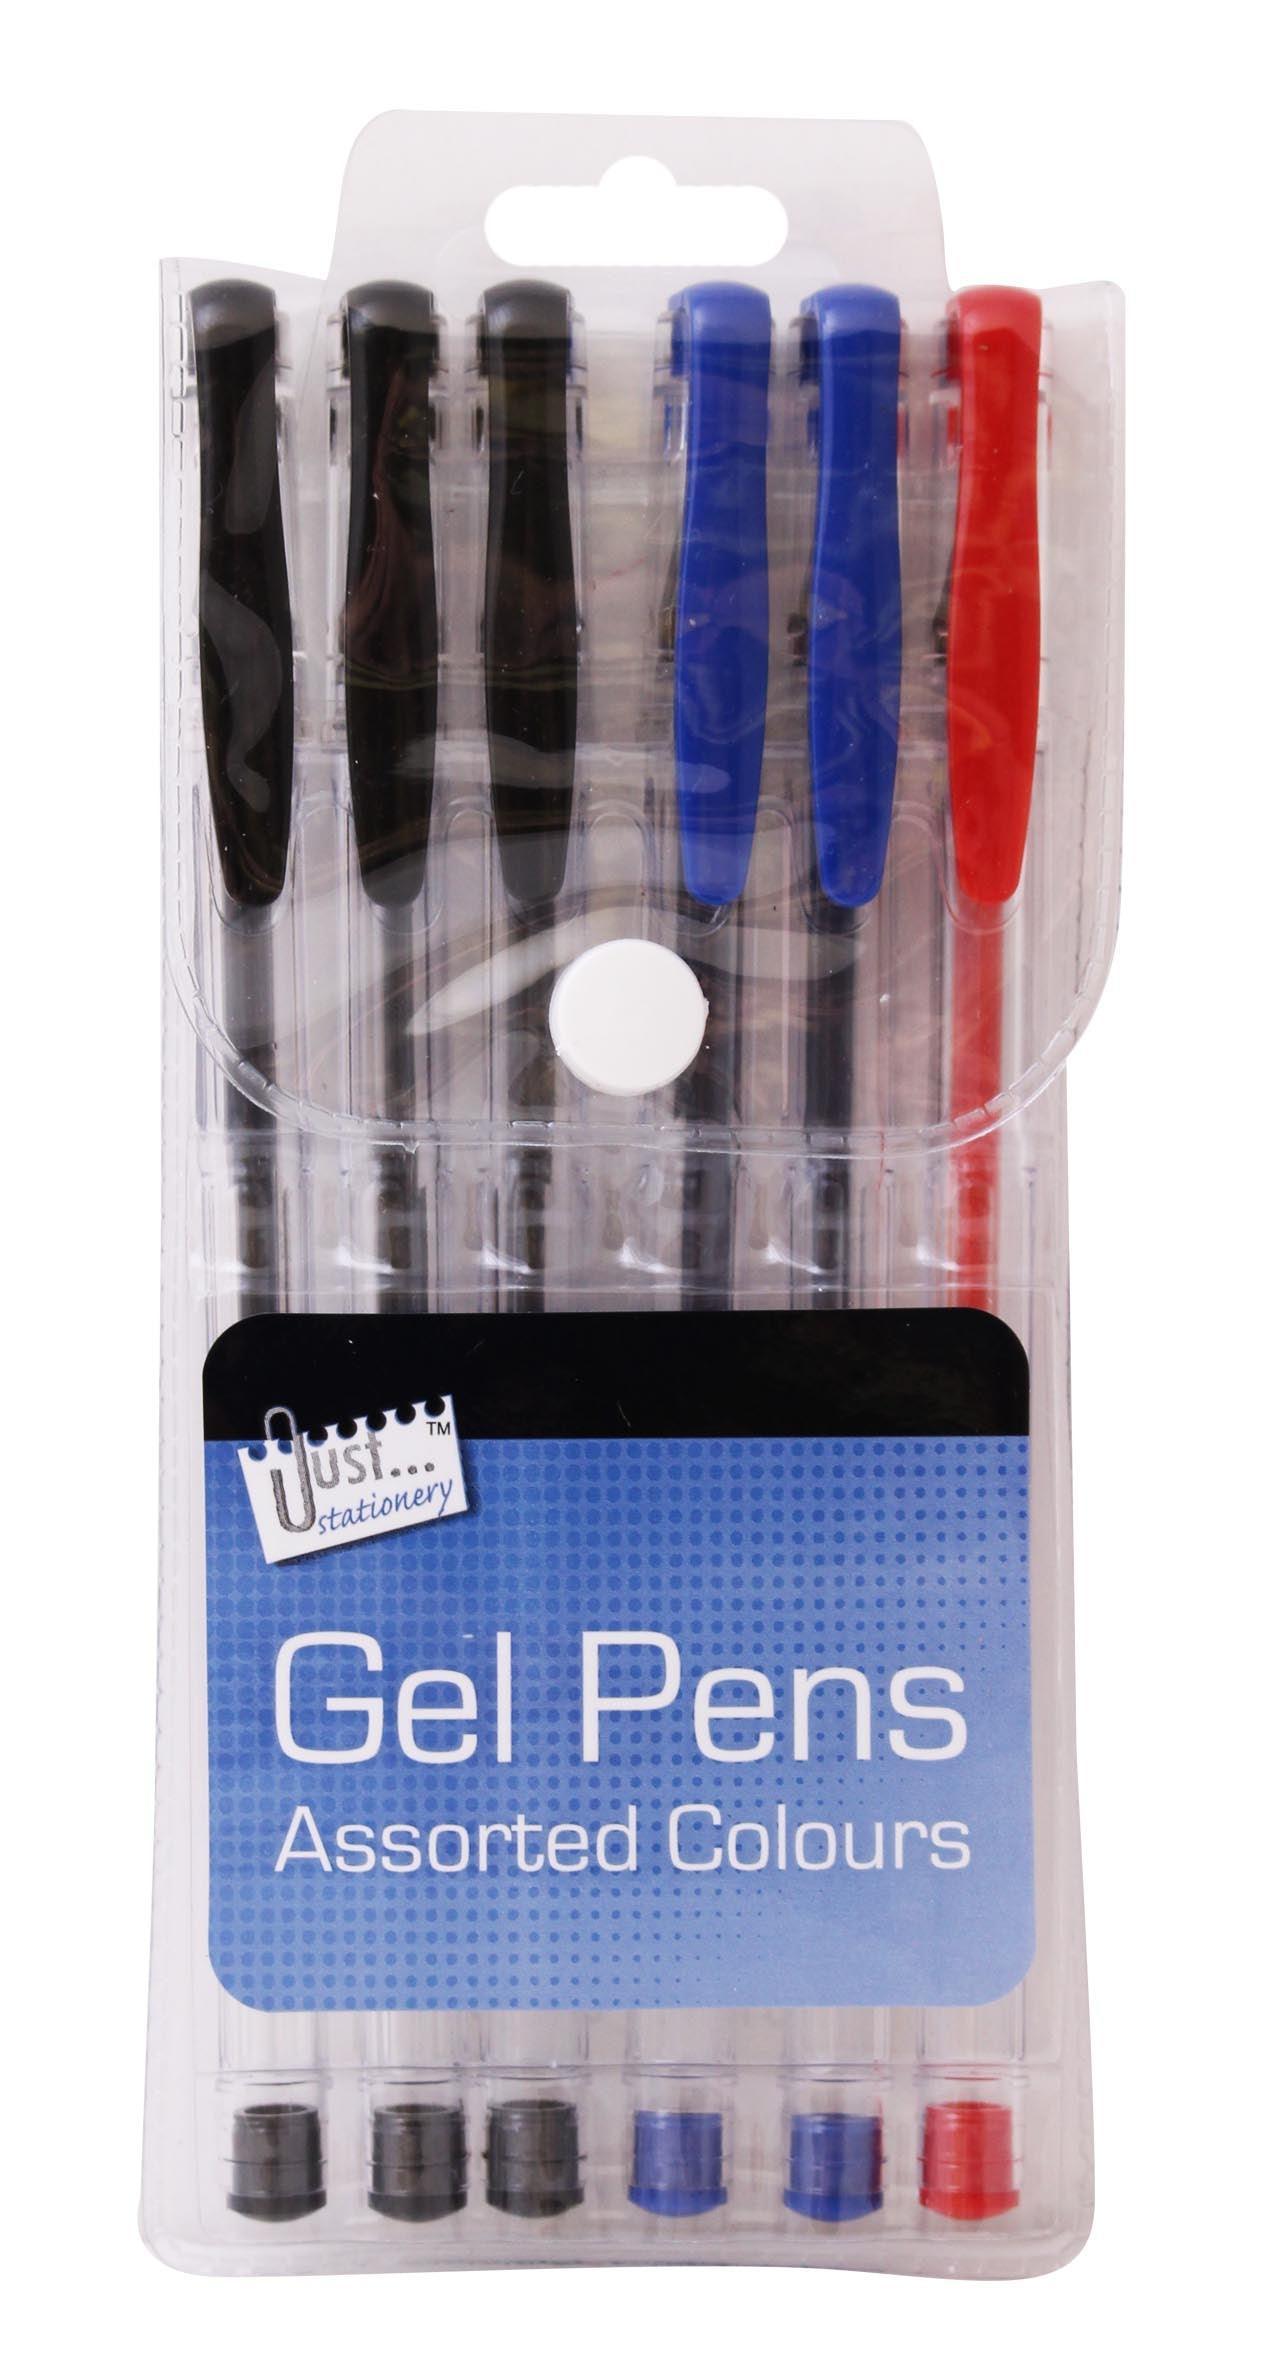 Just Stationery Assorted Coloured Gel Pens | 6 Pack - Choice Stores